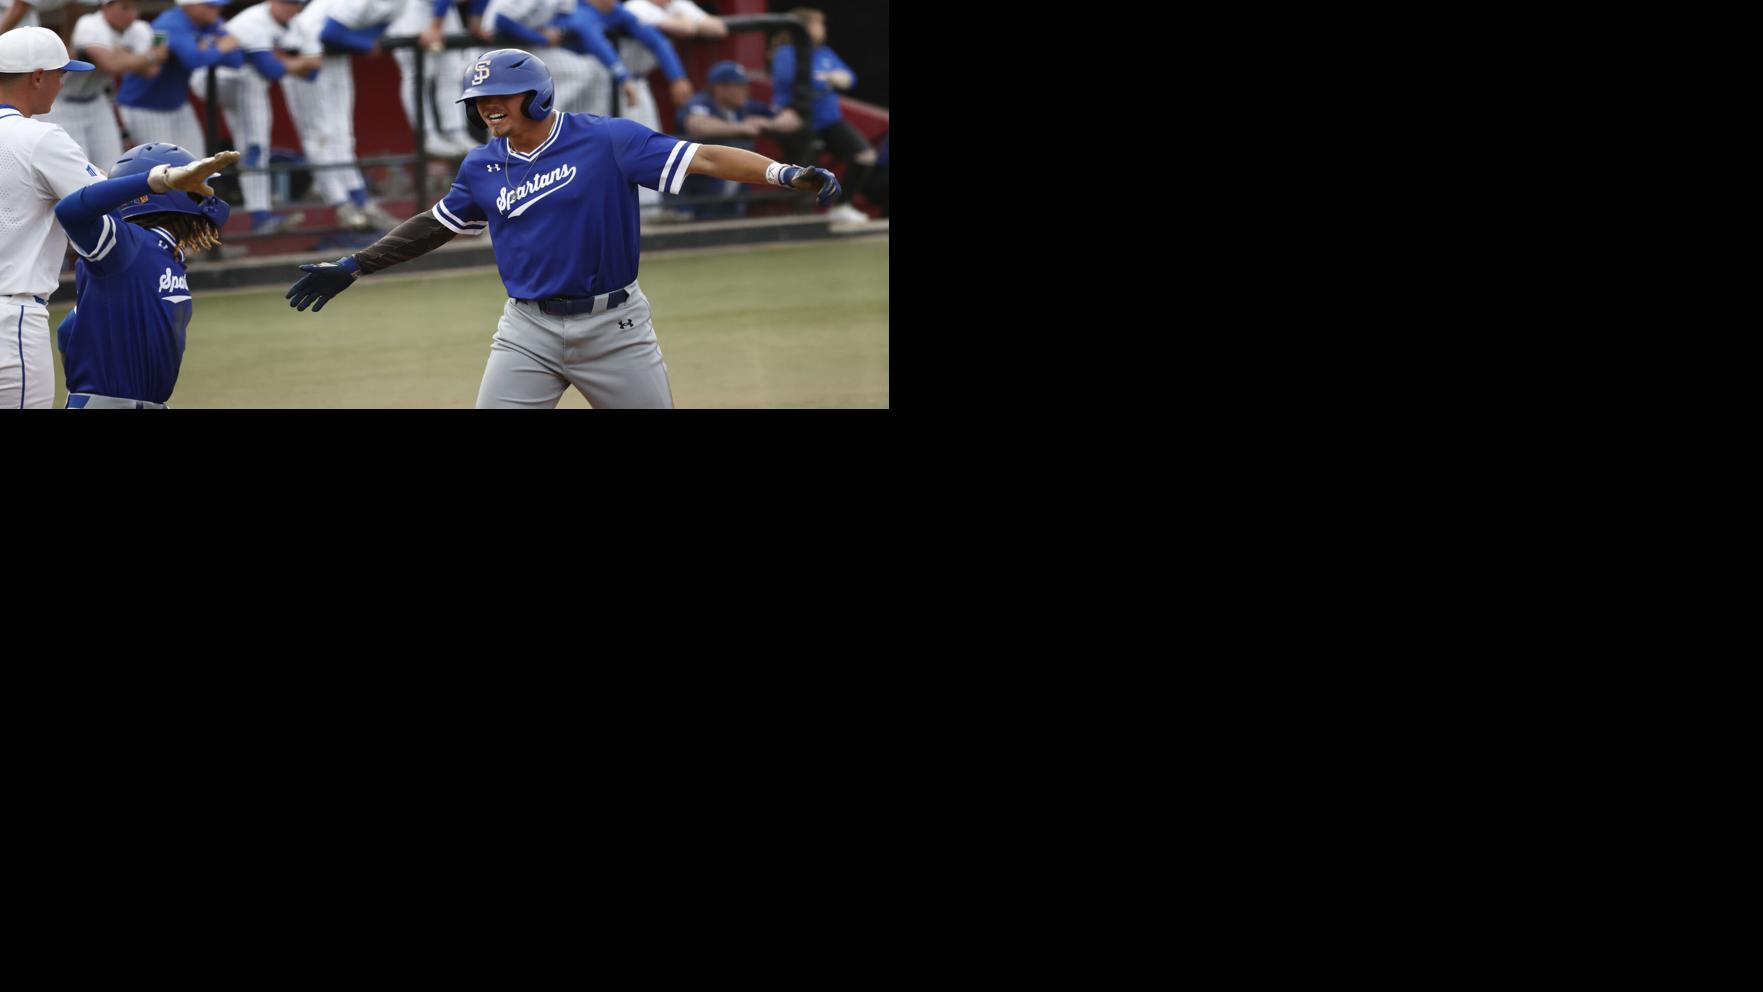 San Jose State outslugs Air Force in pivotal Mountain West baseball tournament matchup